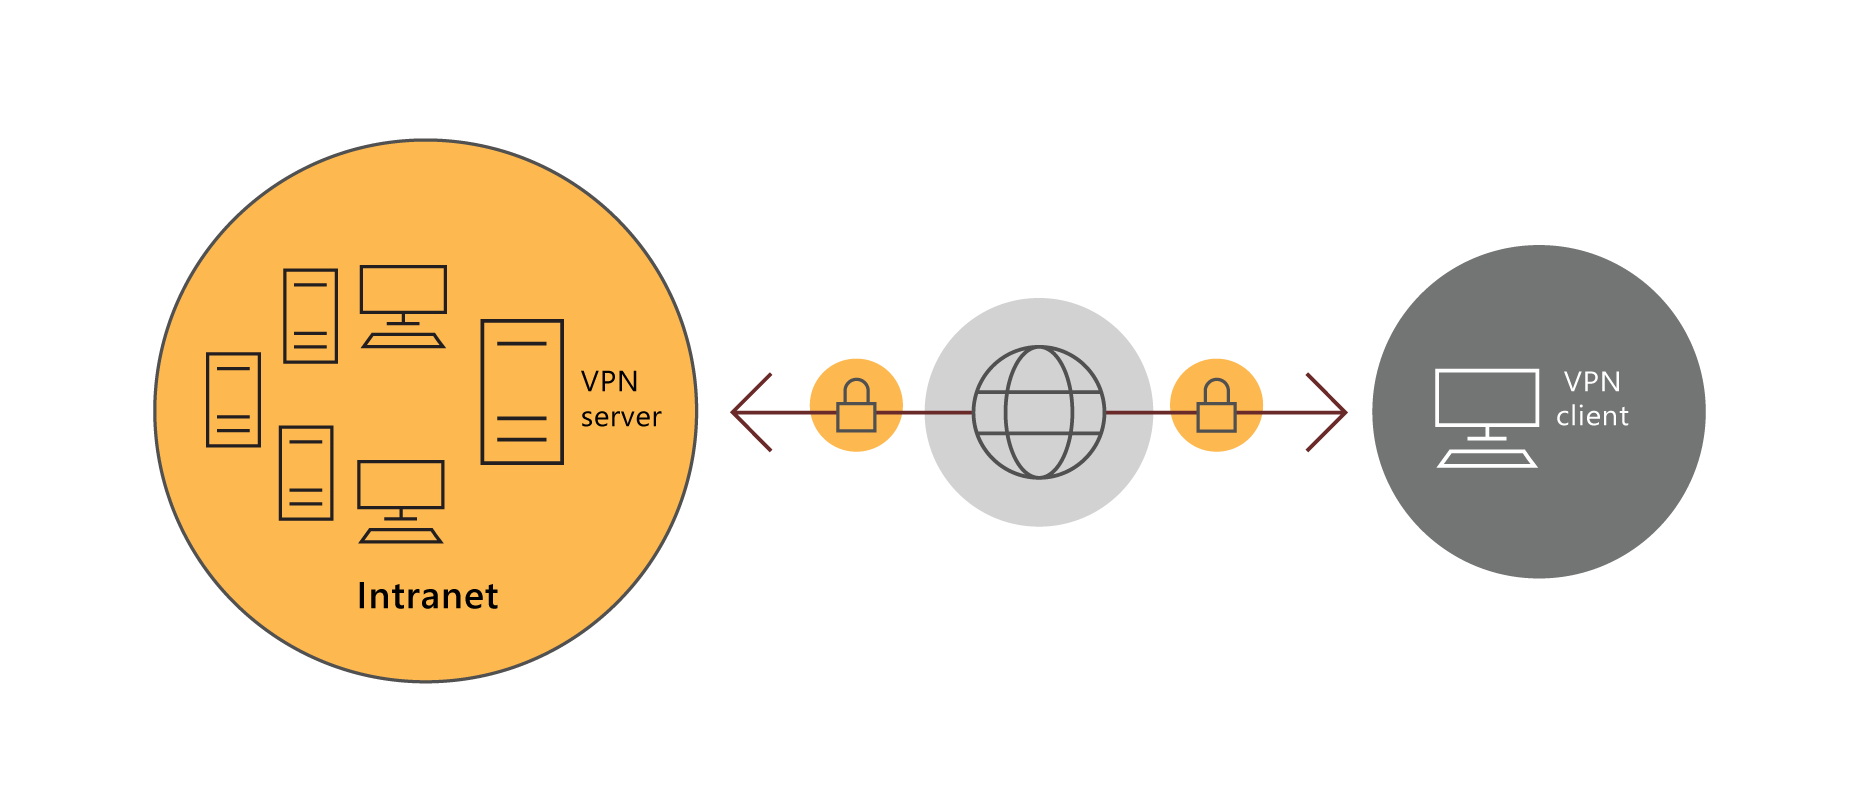 A diagram displays a remote VPN client. The client has a secured connection through the internet a VPN server, and then onto the intranet. A number of server resources are displayed in the intranet.